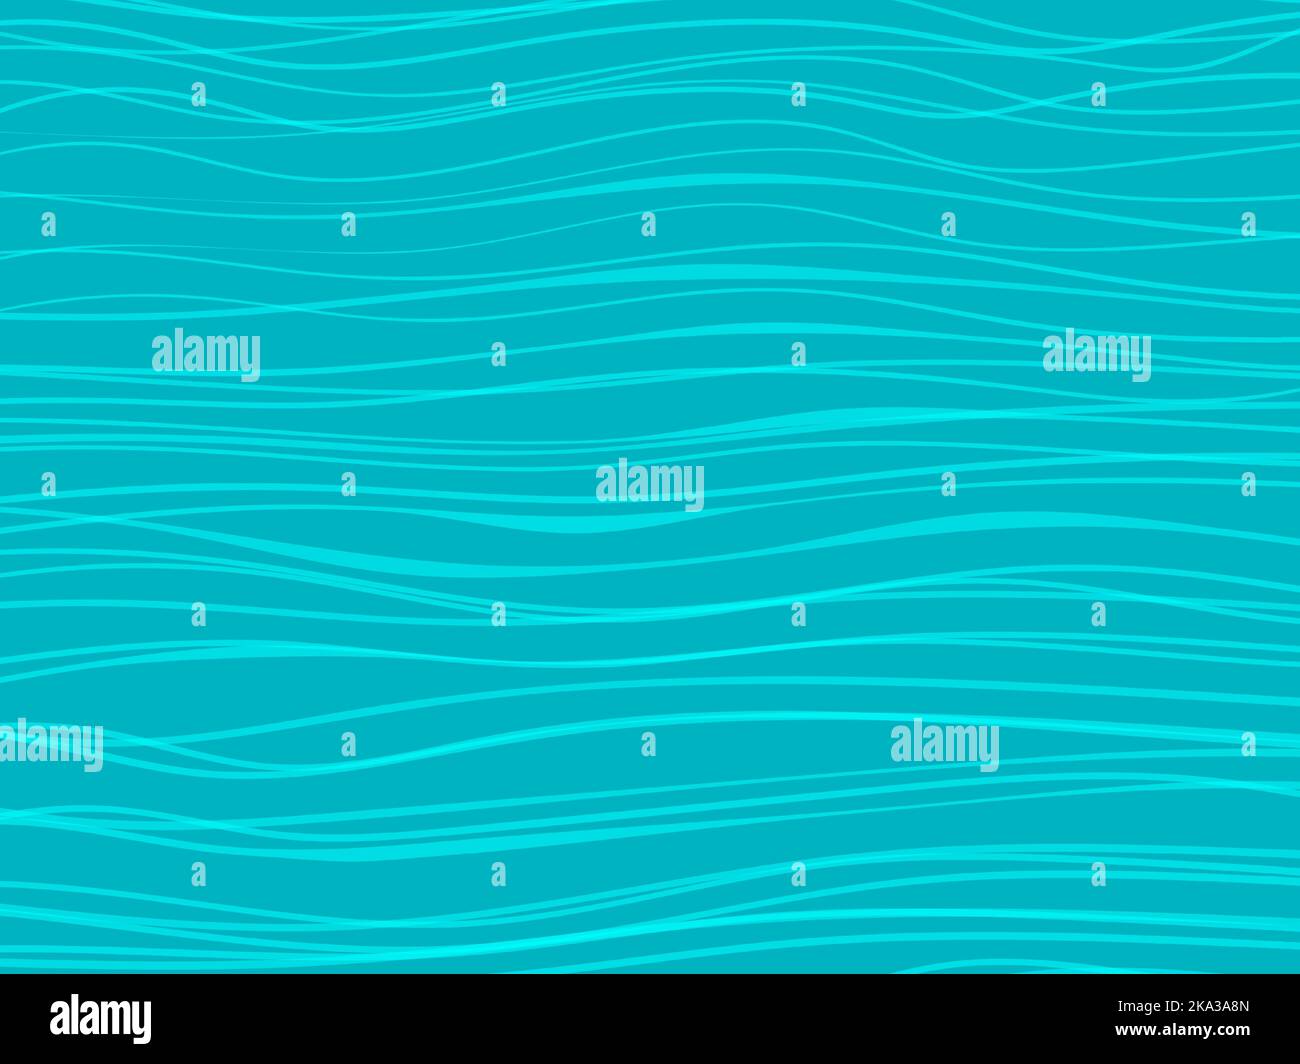 sea ocean wave teal turquoise colored background. hand painted waves illustration Stock Vector